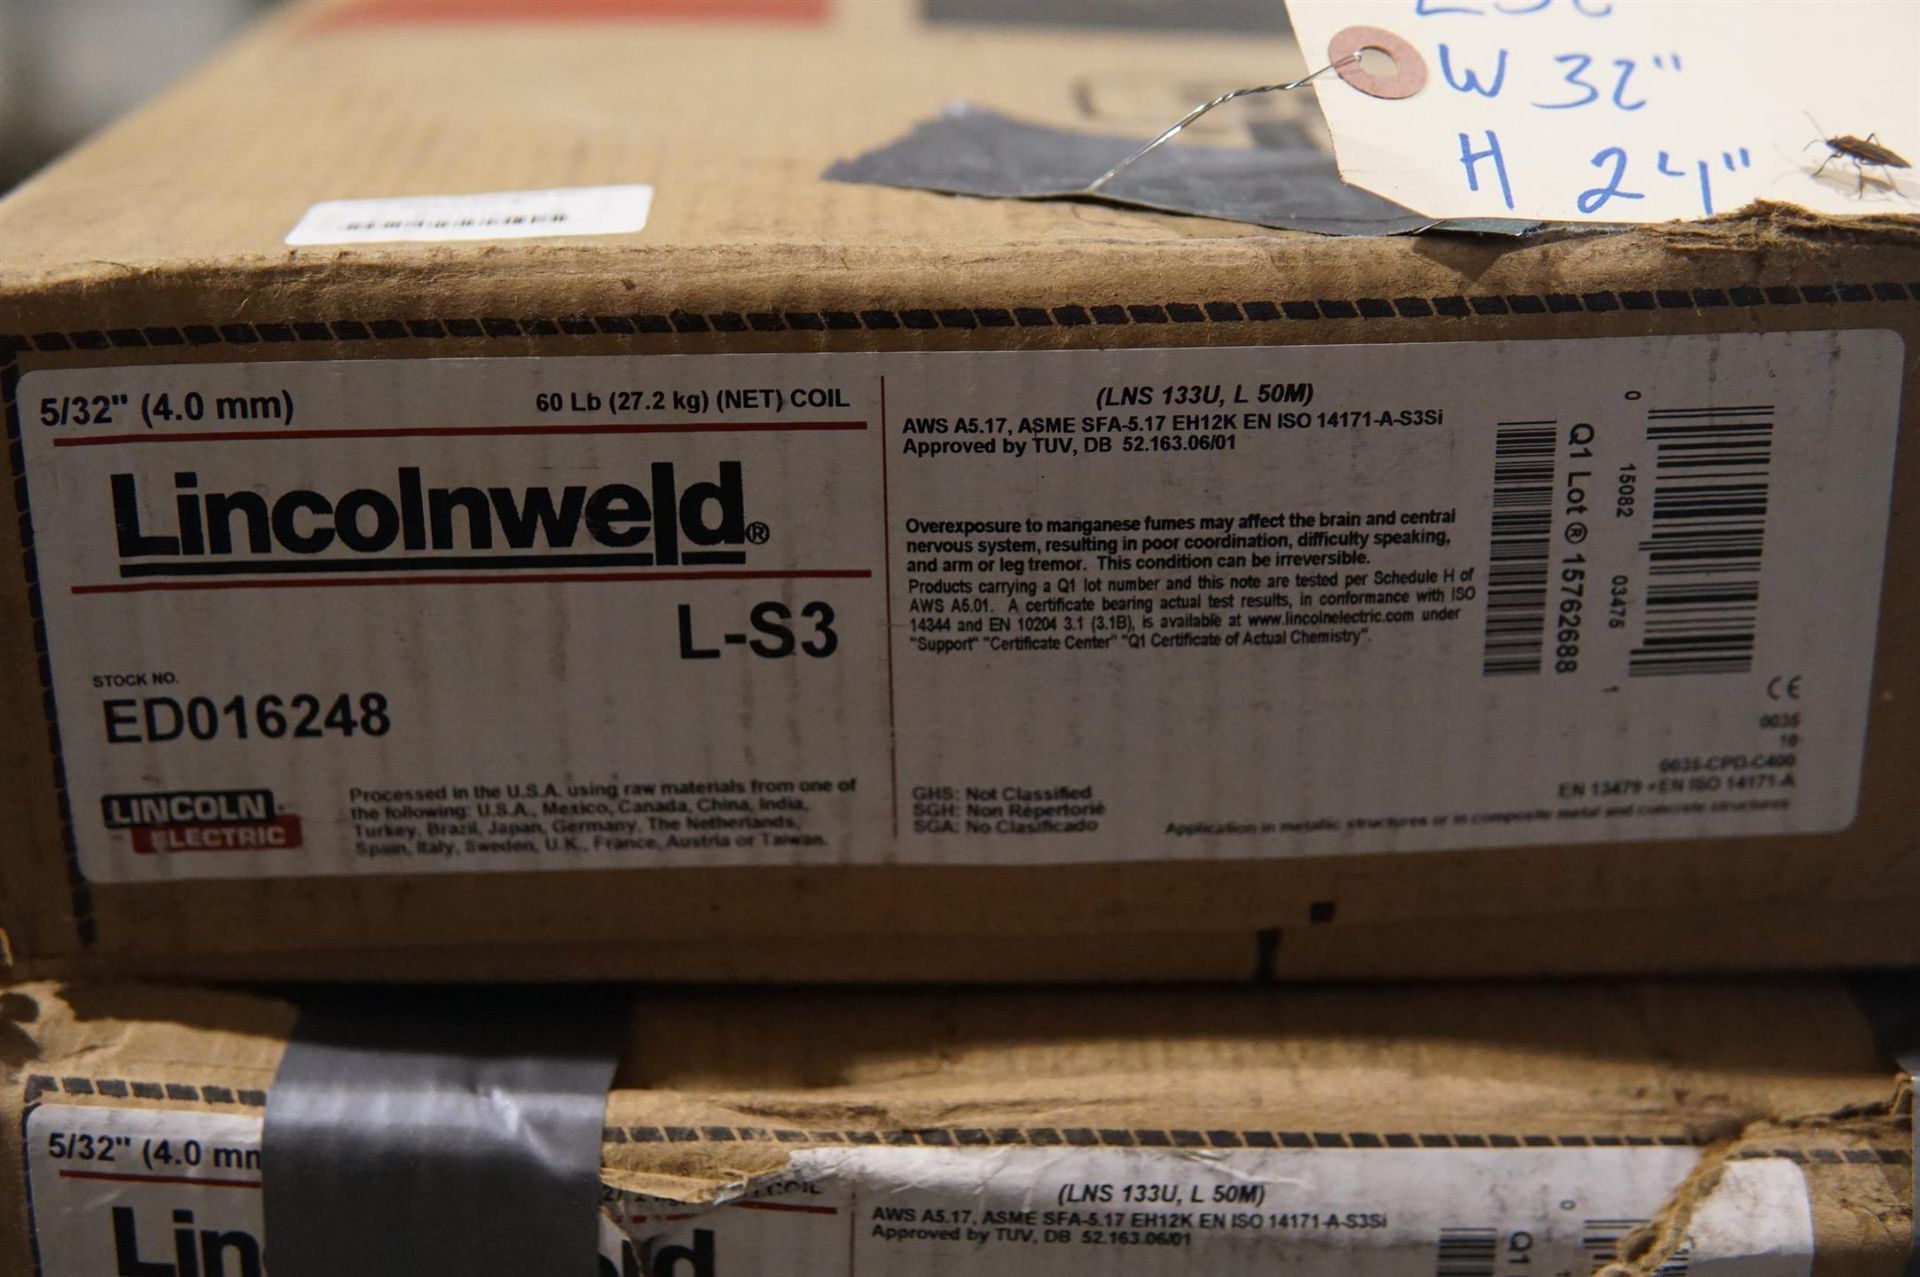 Lincolnweld L-S3 ED016248 5/32 Welding Wire (8)- (LOADING FEE - $25) - Image 3 of 4